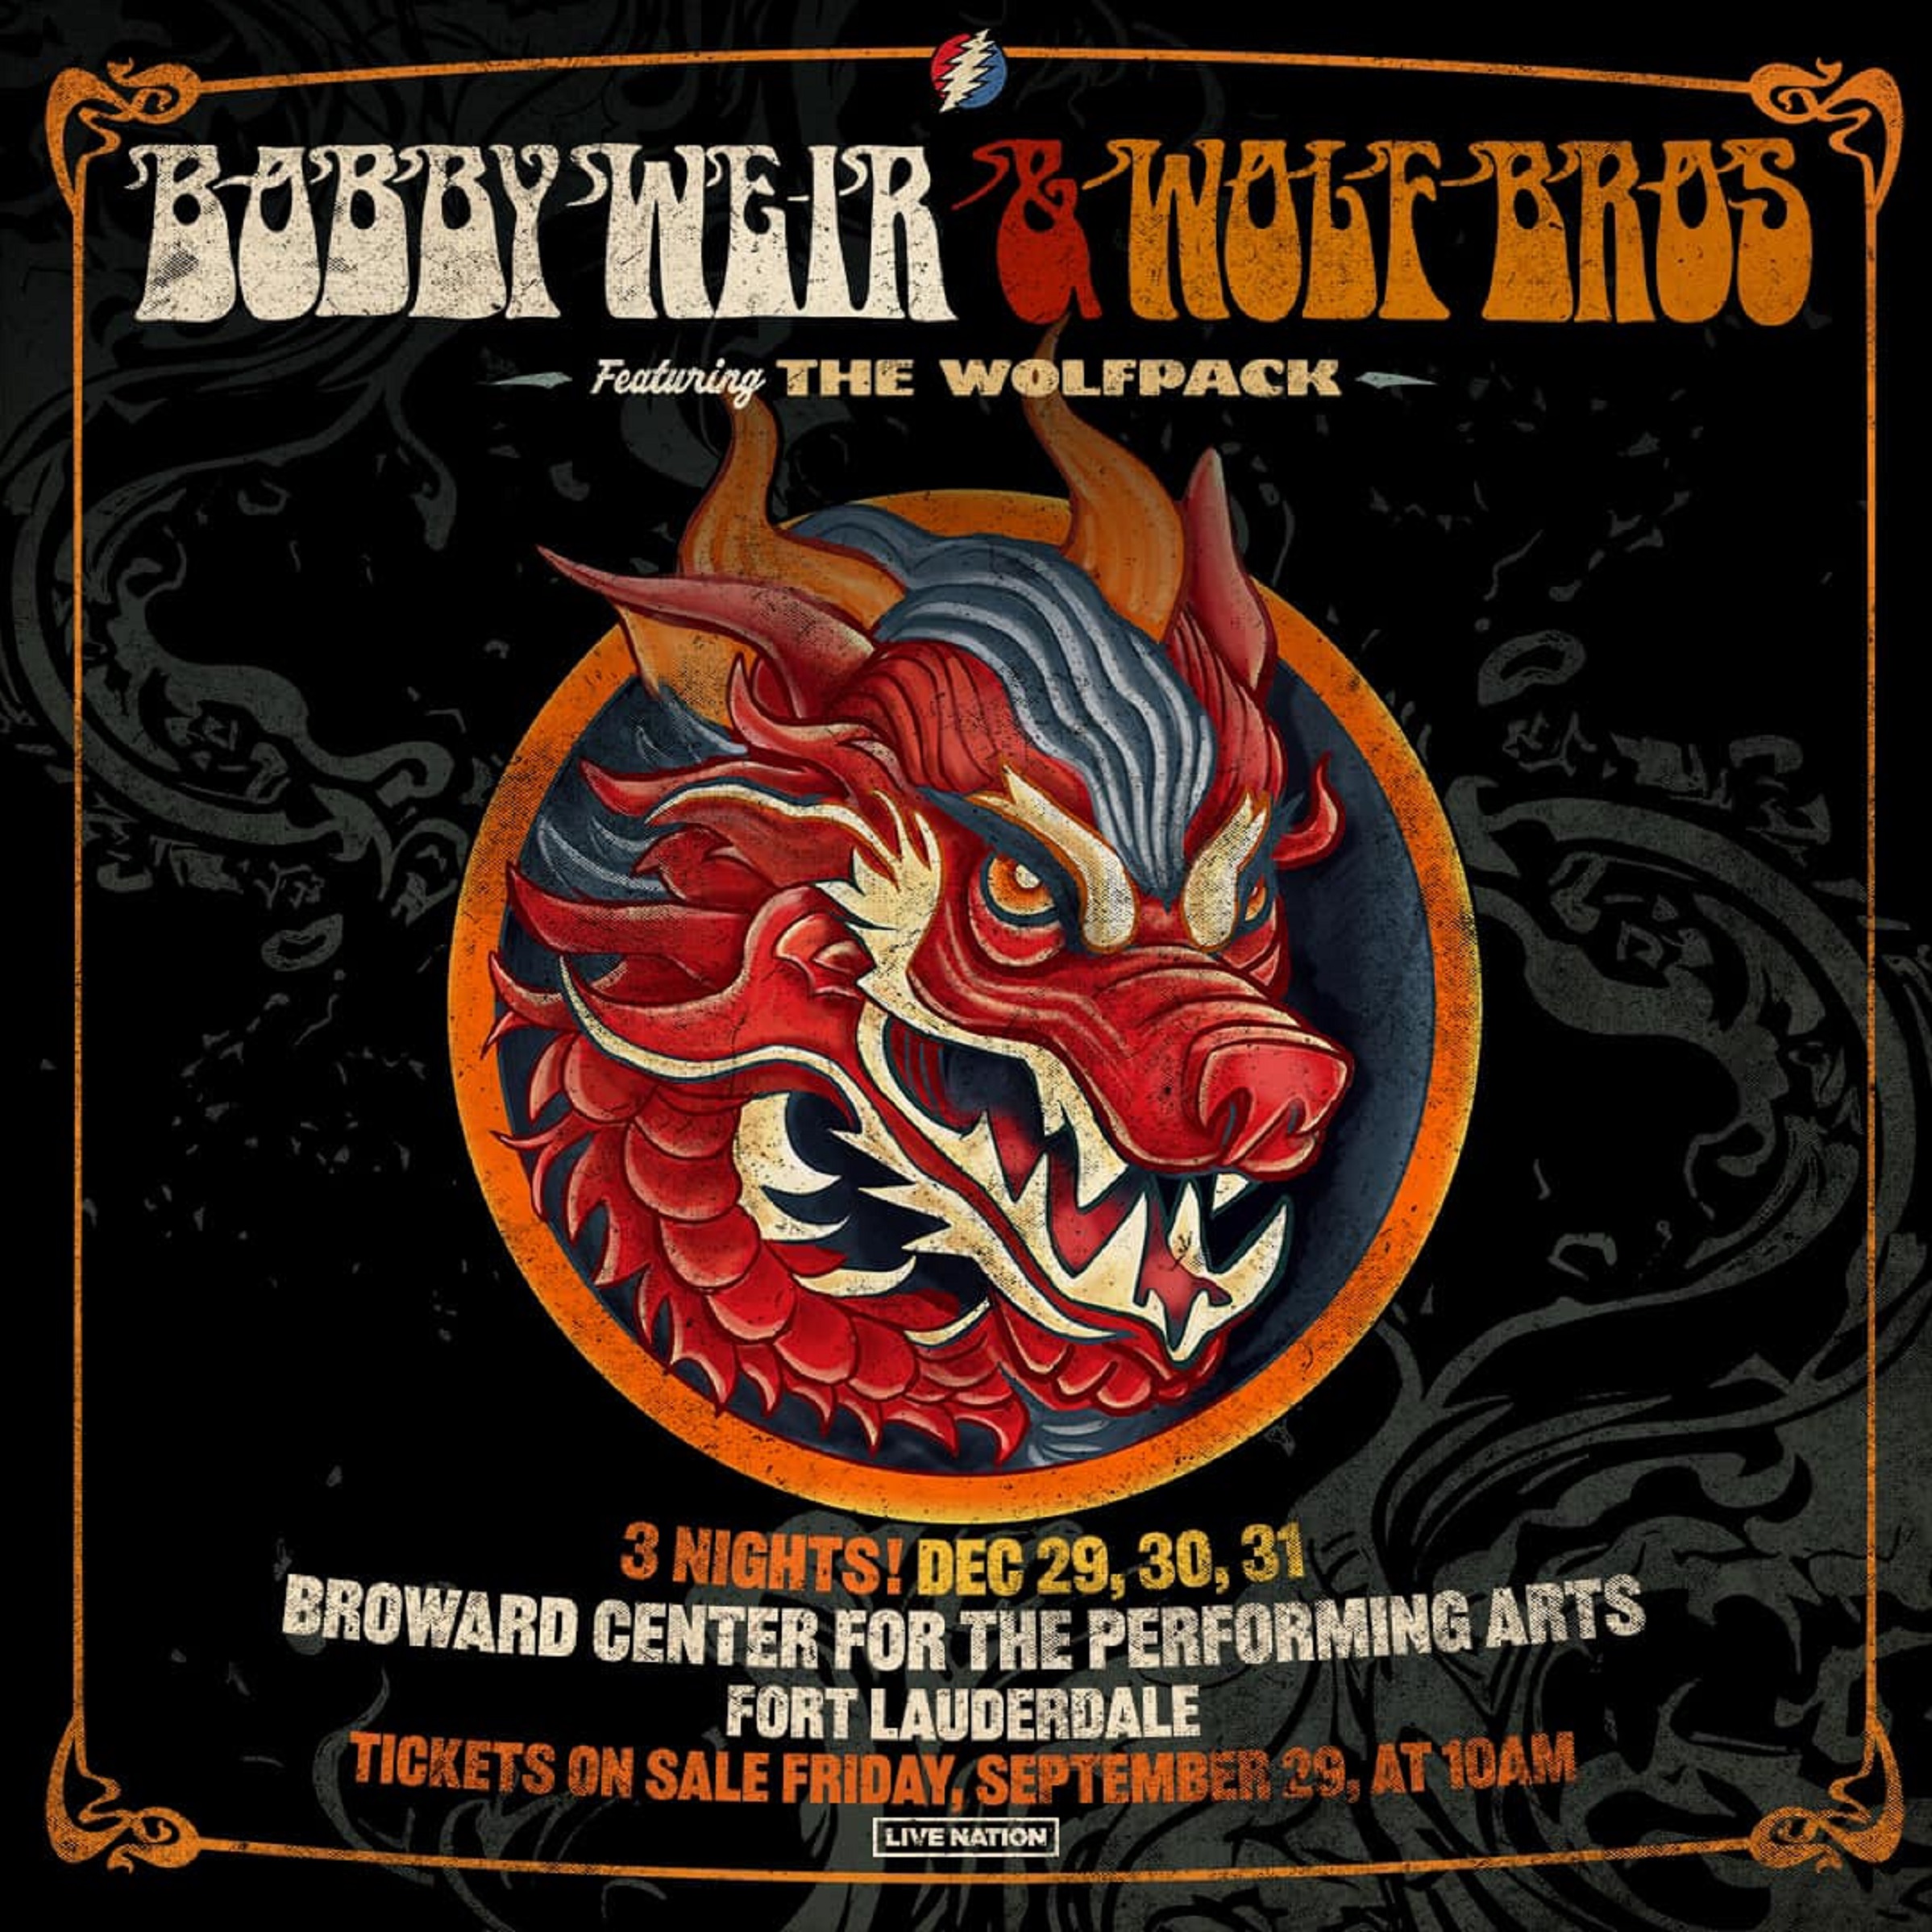 Celebrate the Dawn of 2024 with New Year’s Eve Shenanigans featuring Bob Weir & Wolf Bros and The Wolfpack in Fort Lauderdale, FL!